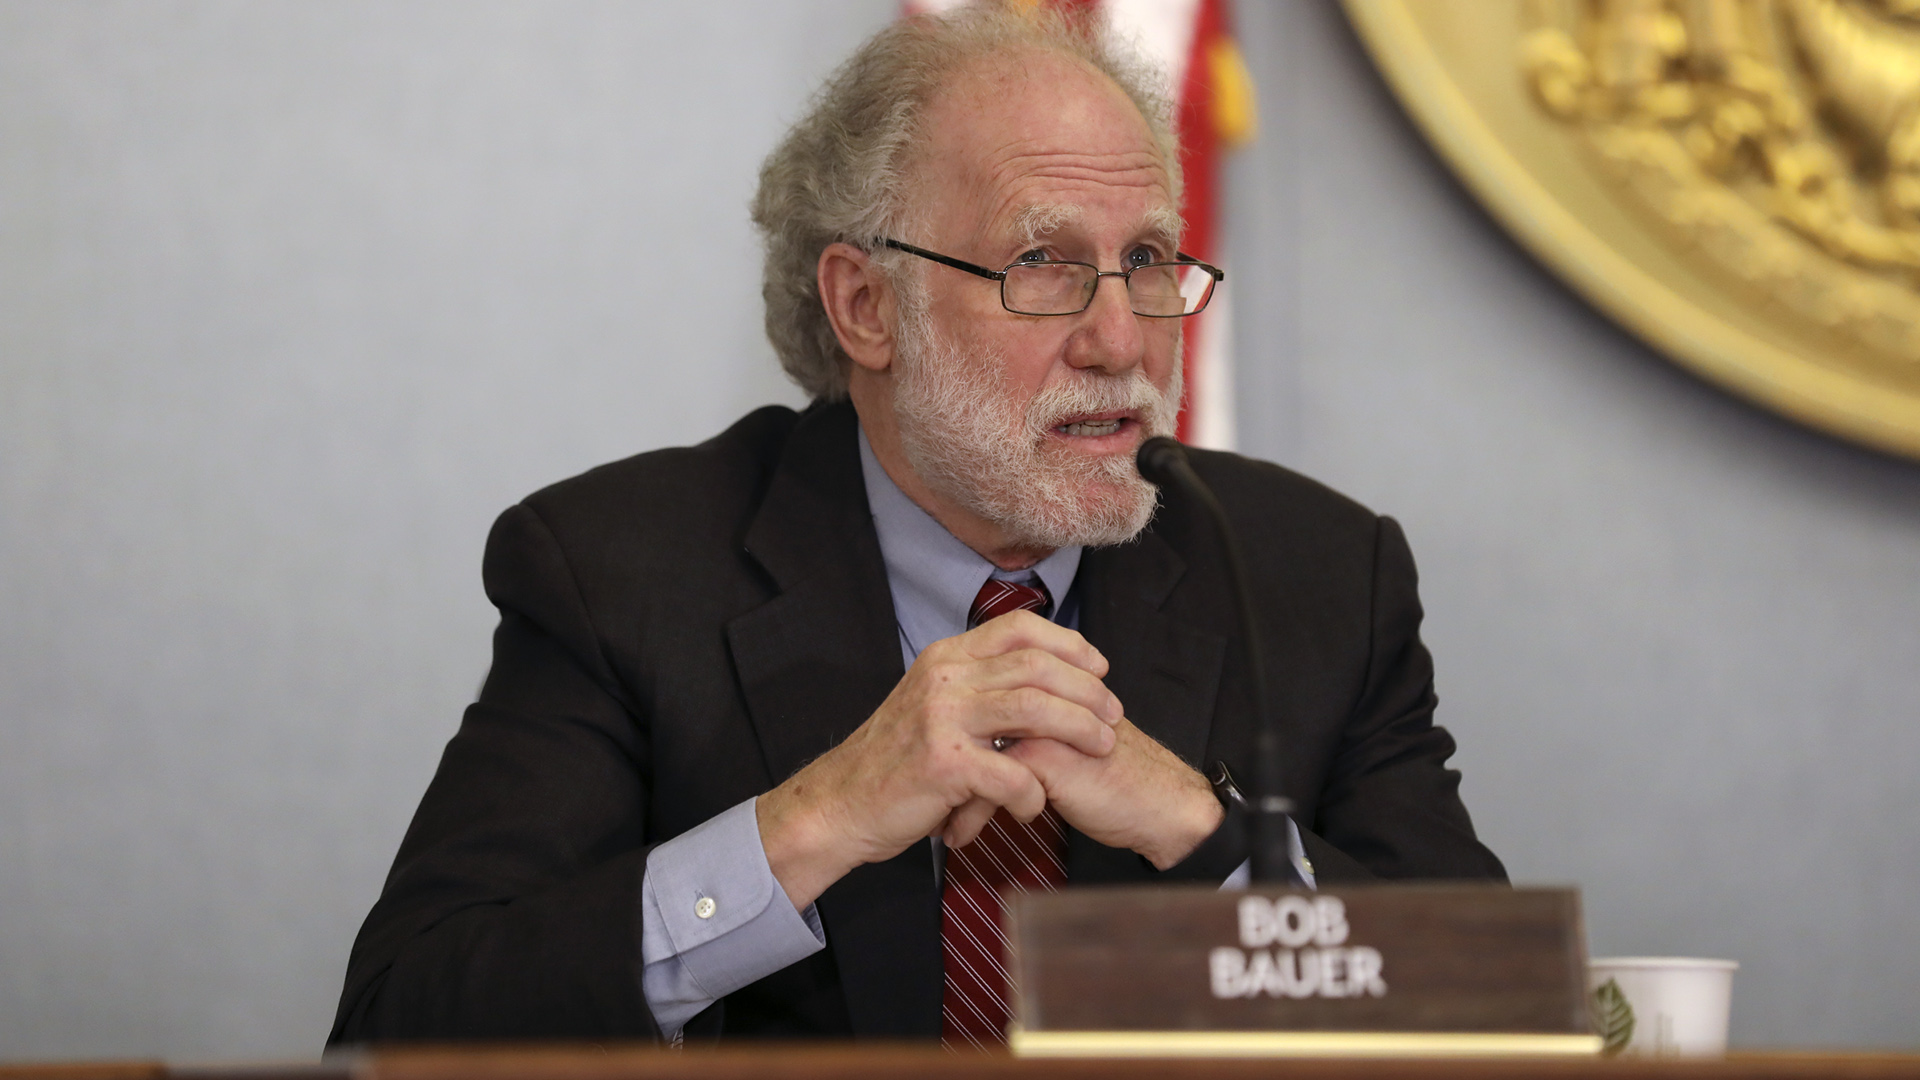 Bob Bauer sits at a conference table facing a microphone and behind a nameplate reading "Bob Bauer."